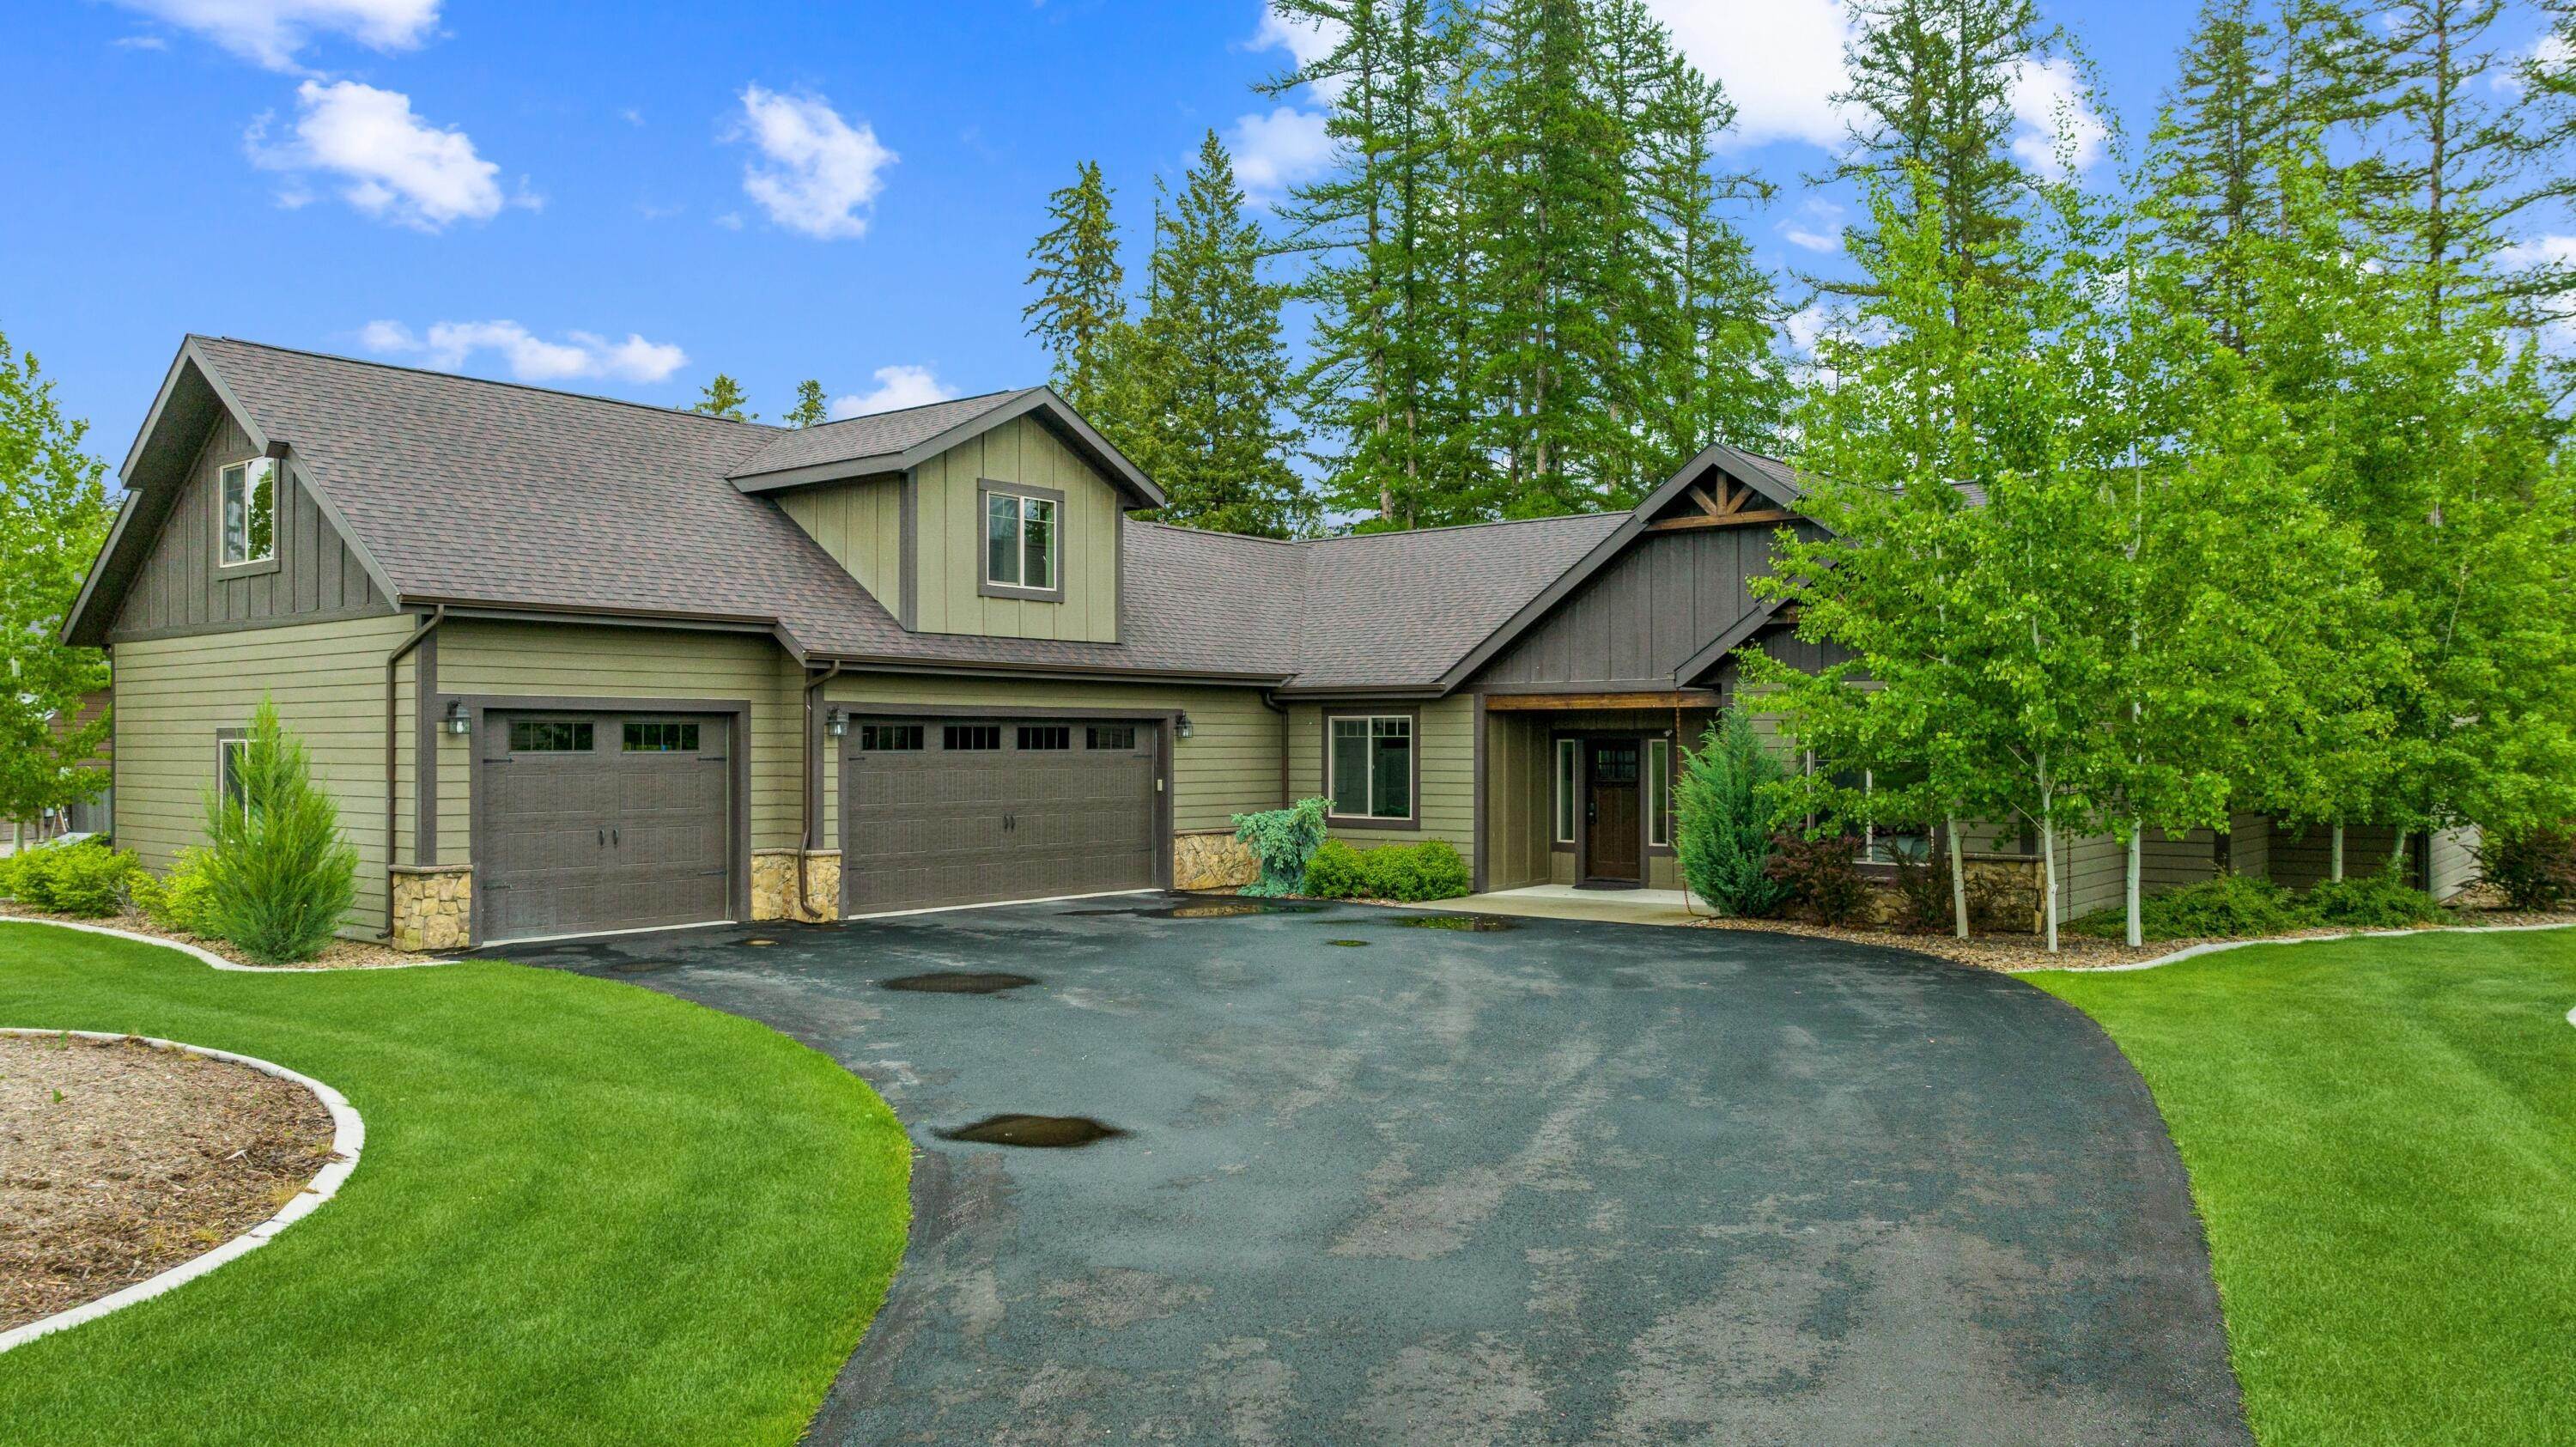 2. Single Family Homes for Sale at 300 Whispering Meadows Trail, Kalispell, Montana 59901 United States